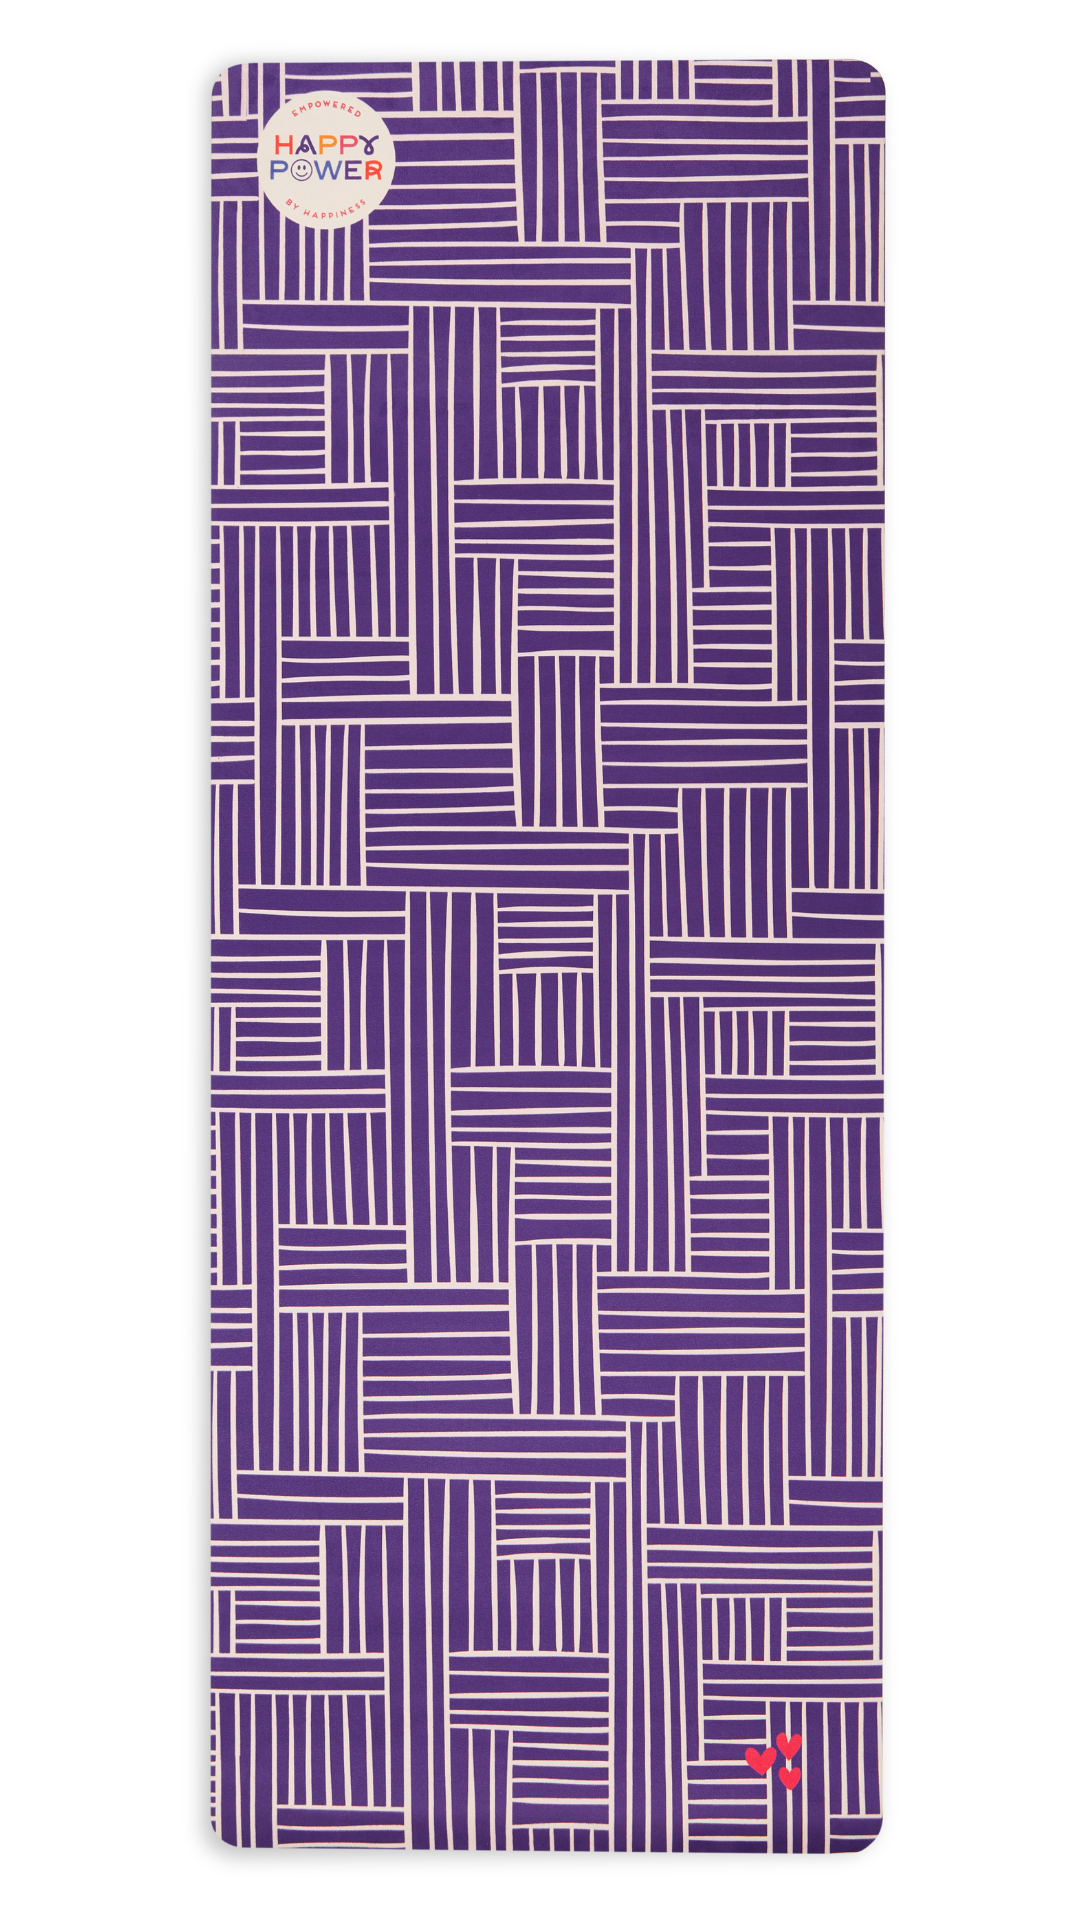 Eco friendly yoga and exercise mat featuring Purple background with white lines and three (3) small hearts on the bottom corner.